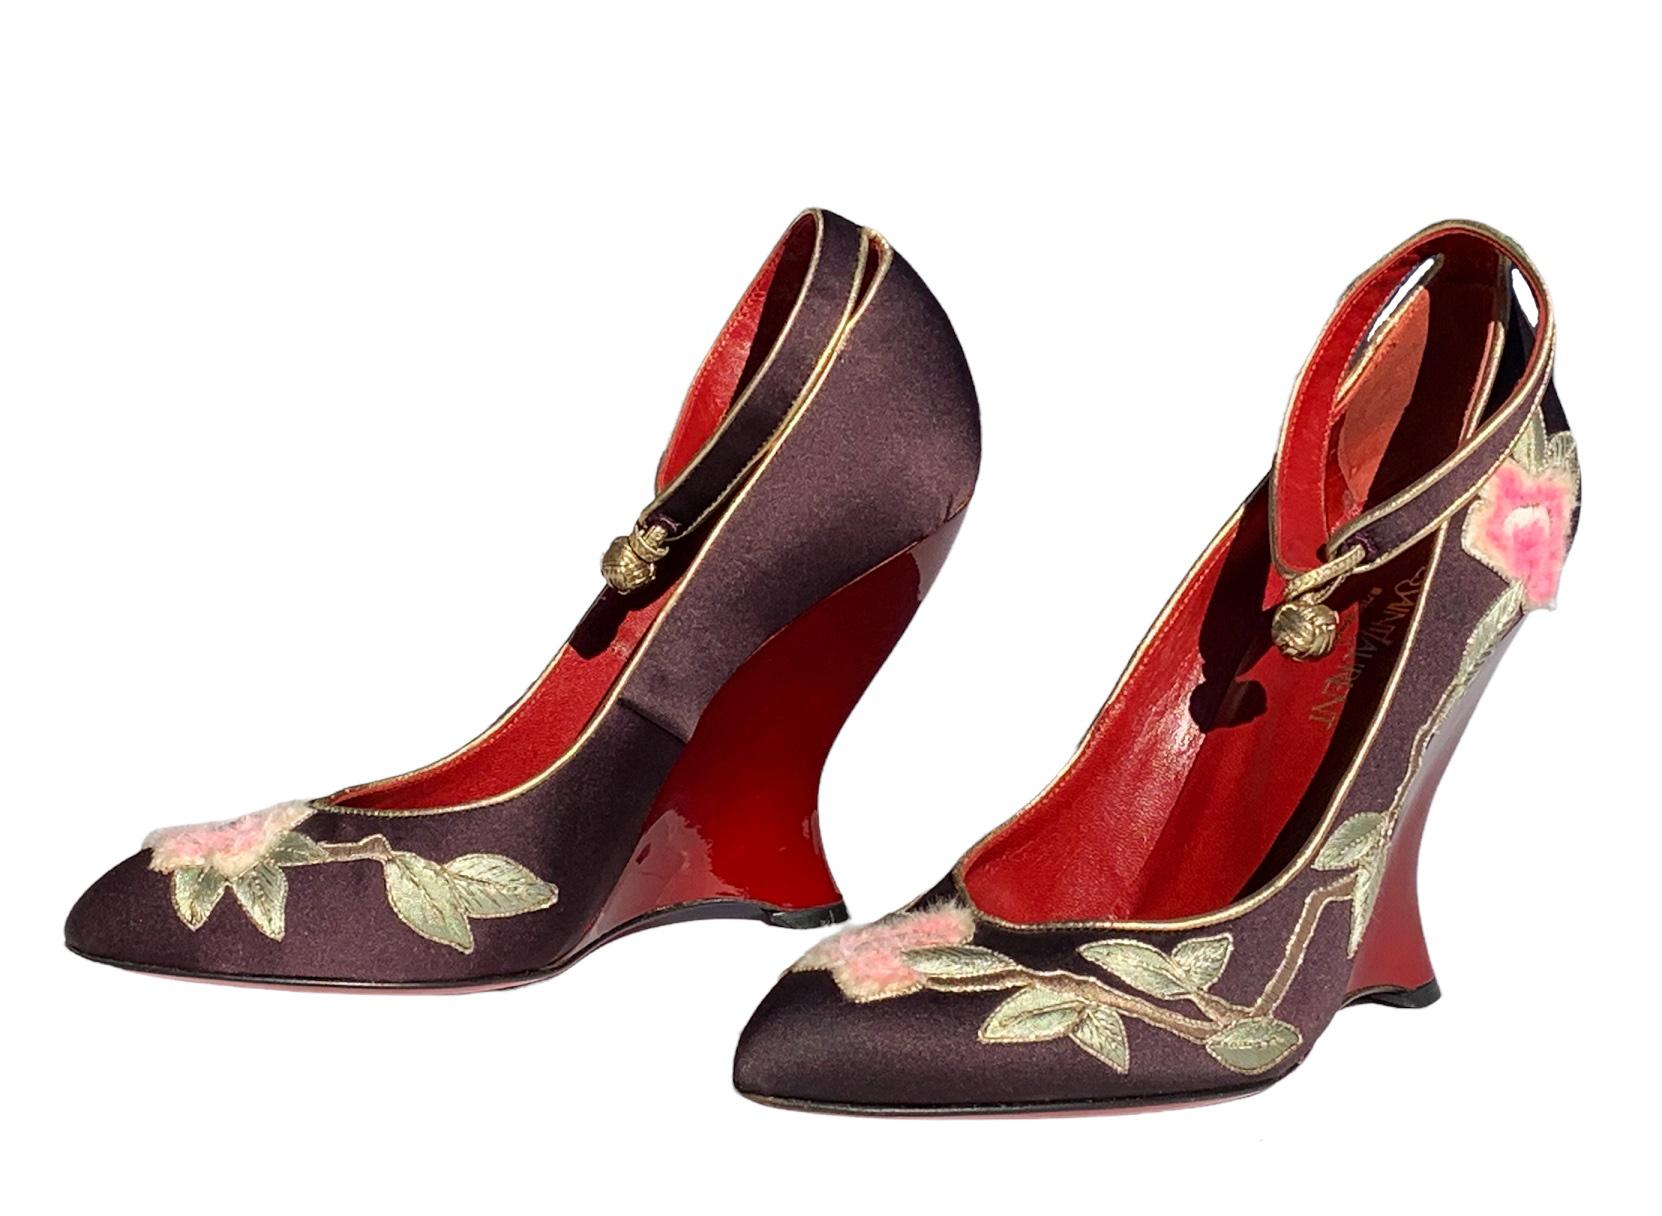 New Tom Ford for Yves Saint Laurent F/W 2004 *Opium* Lotus Pumps Shoes 39.5  9.5 For Sale 1